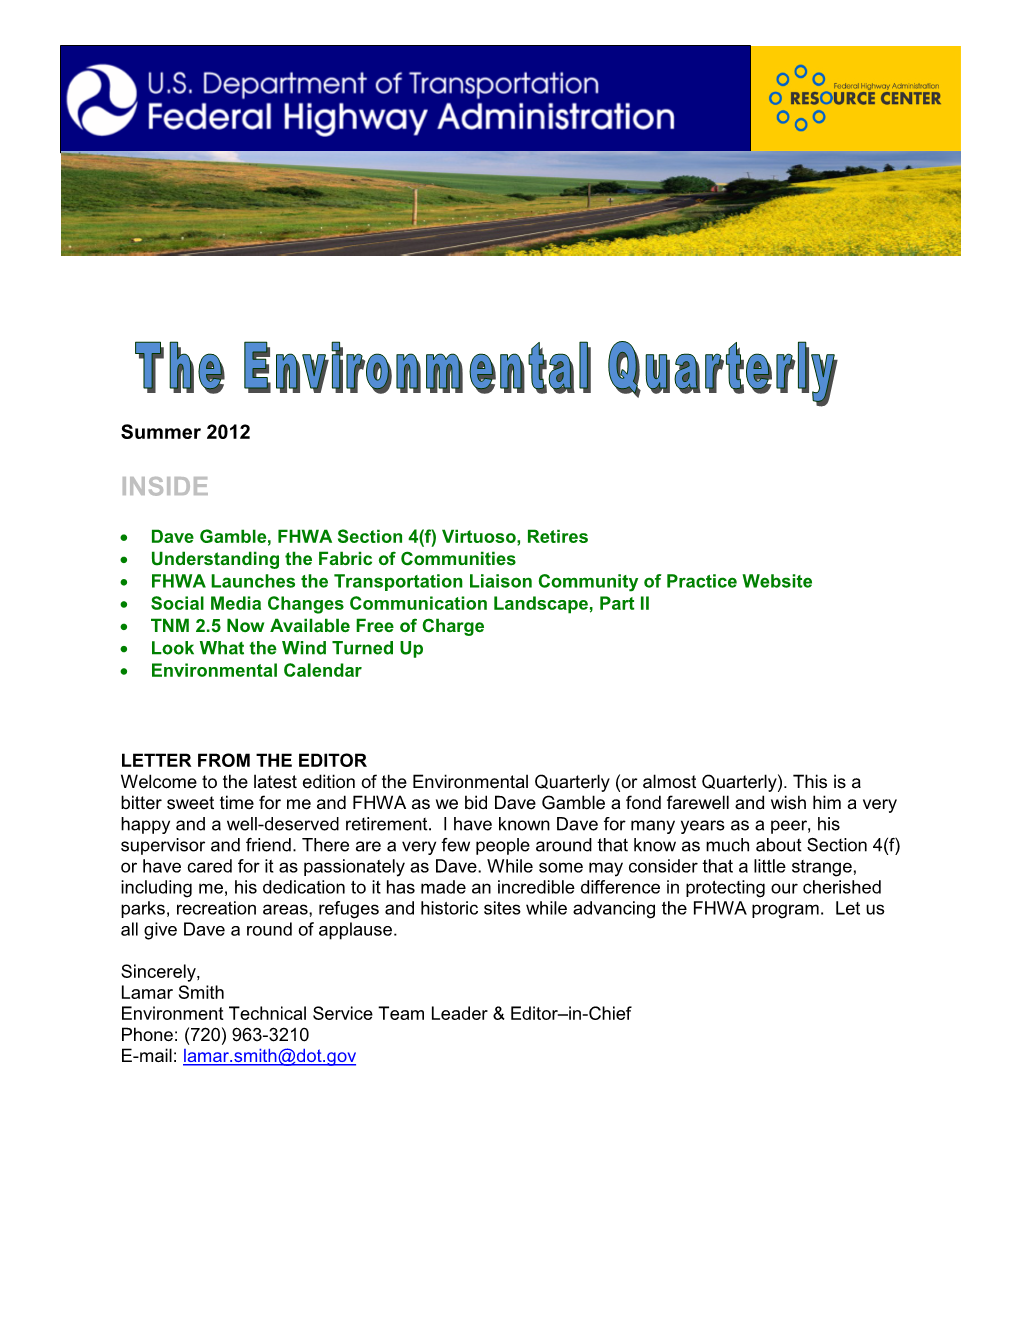 The Environmental Quarterly (Or Almost Quarterly)